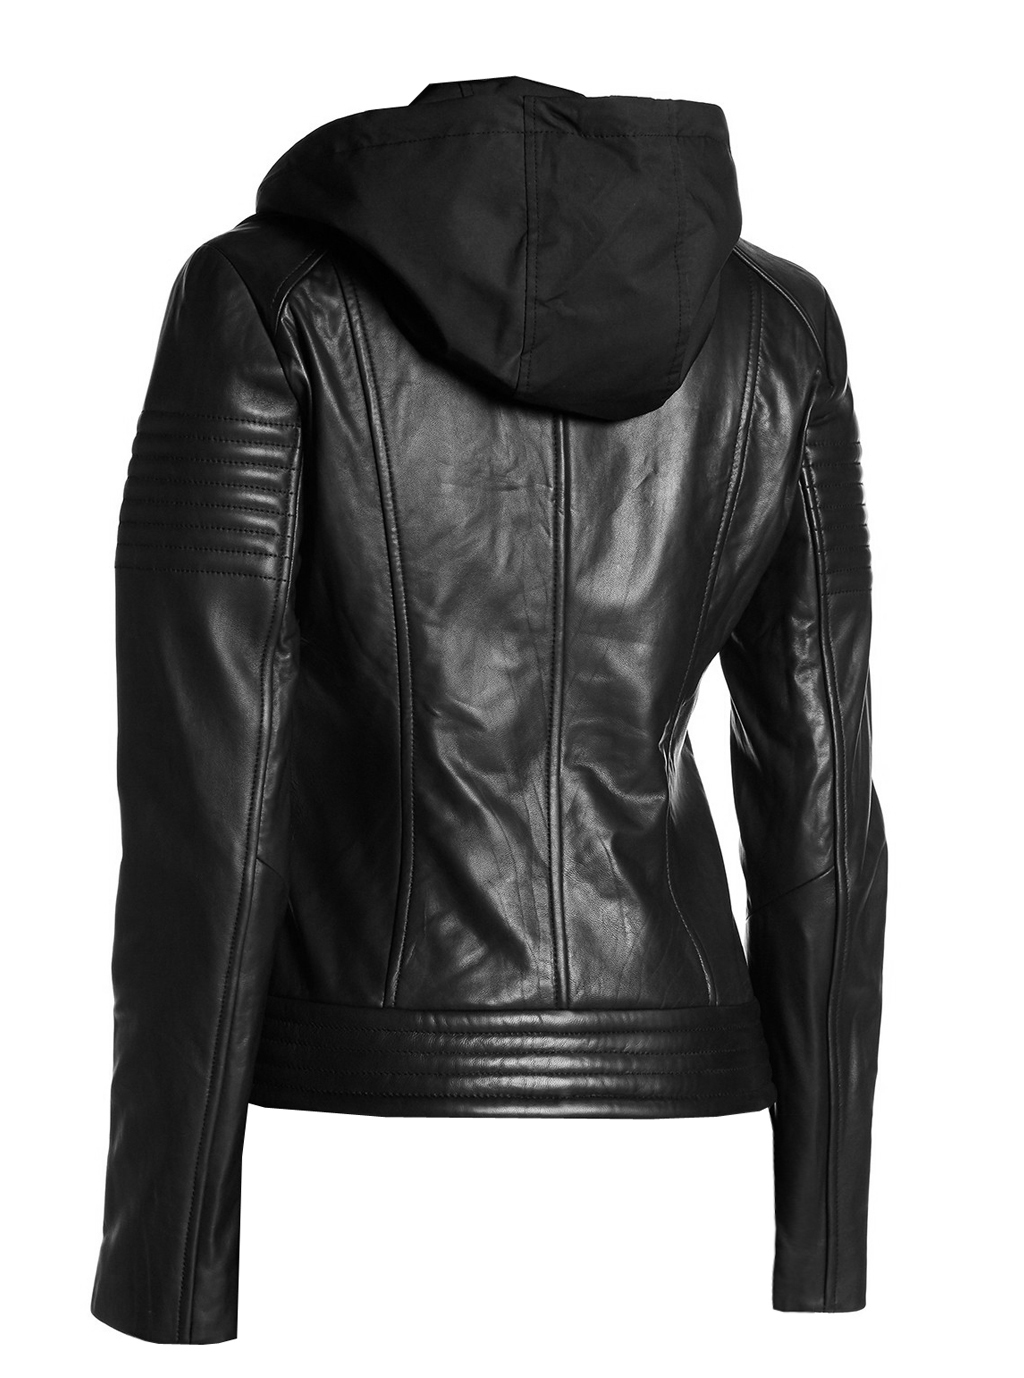 Hoved Creed lave mad Hooded Women Leather Jackets Zippy side pockets Quilted Design